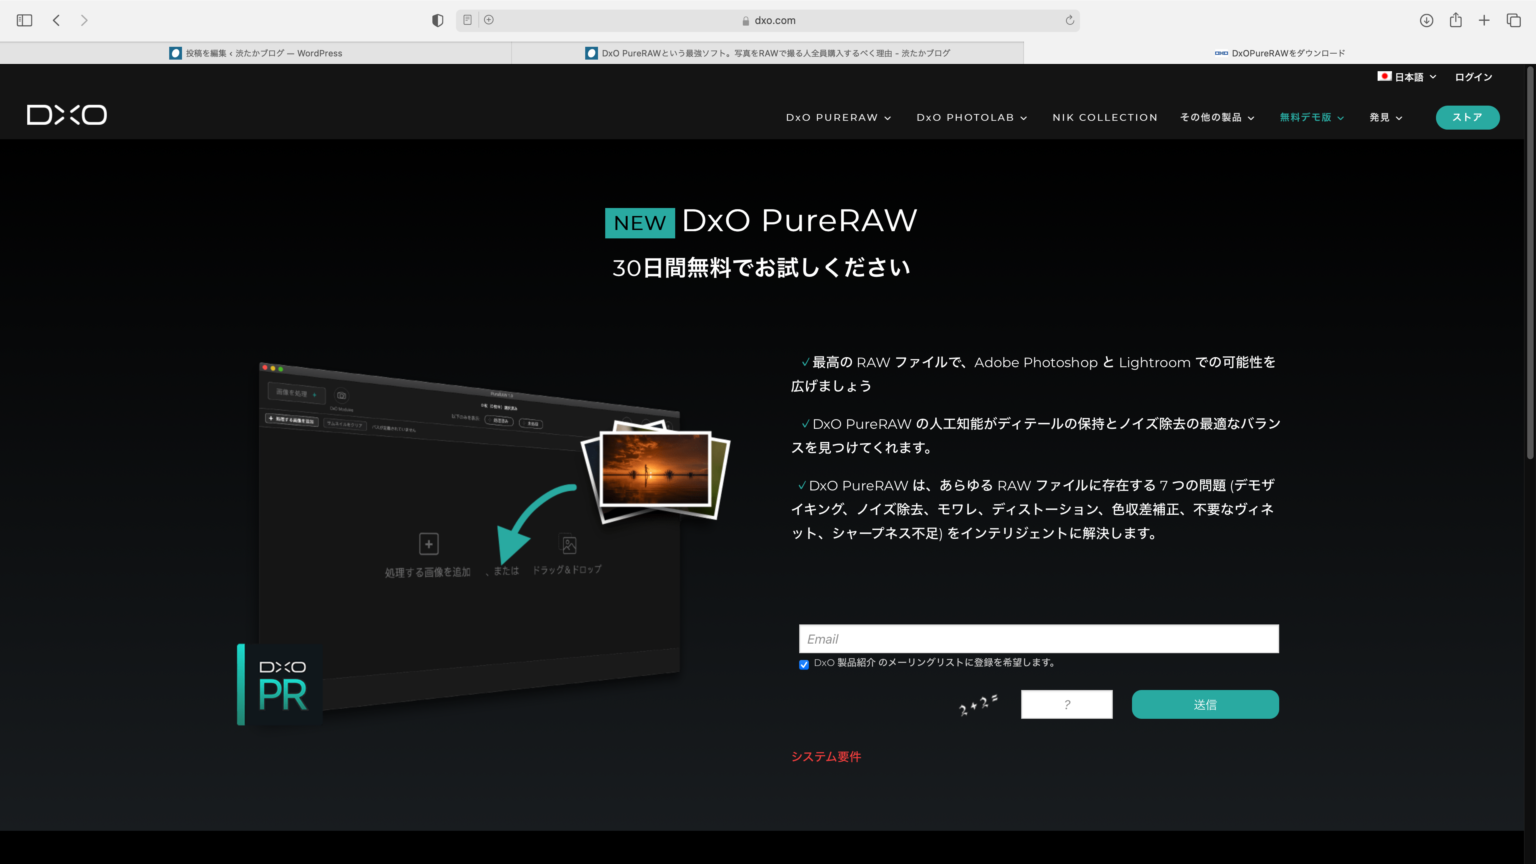 DxO PureRAW 3.3.1.14 instal the new version for android